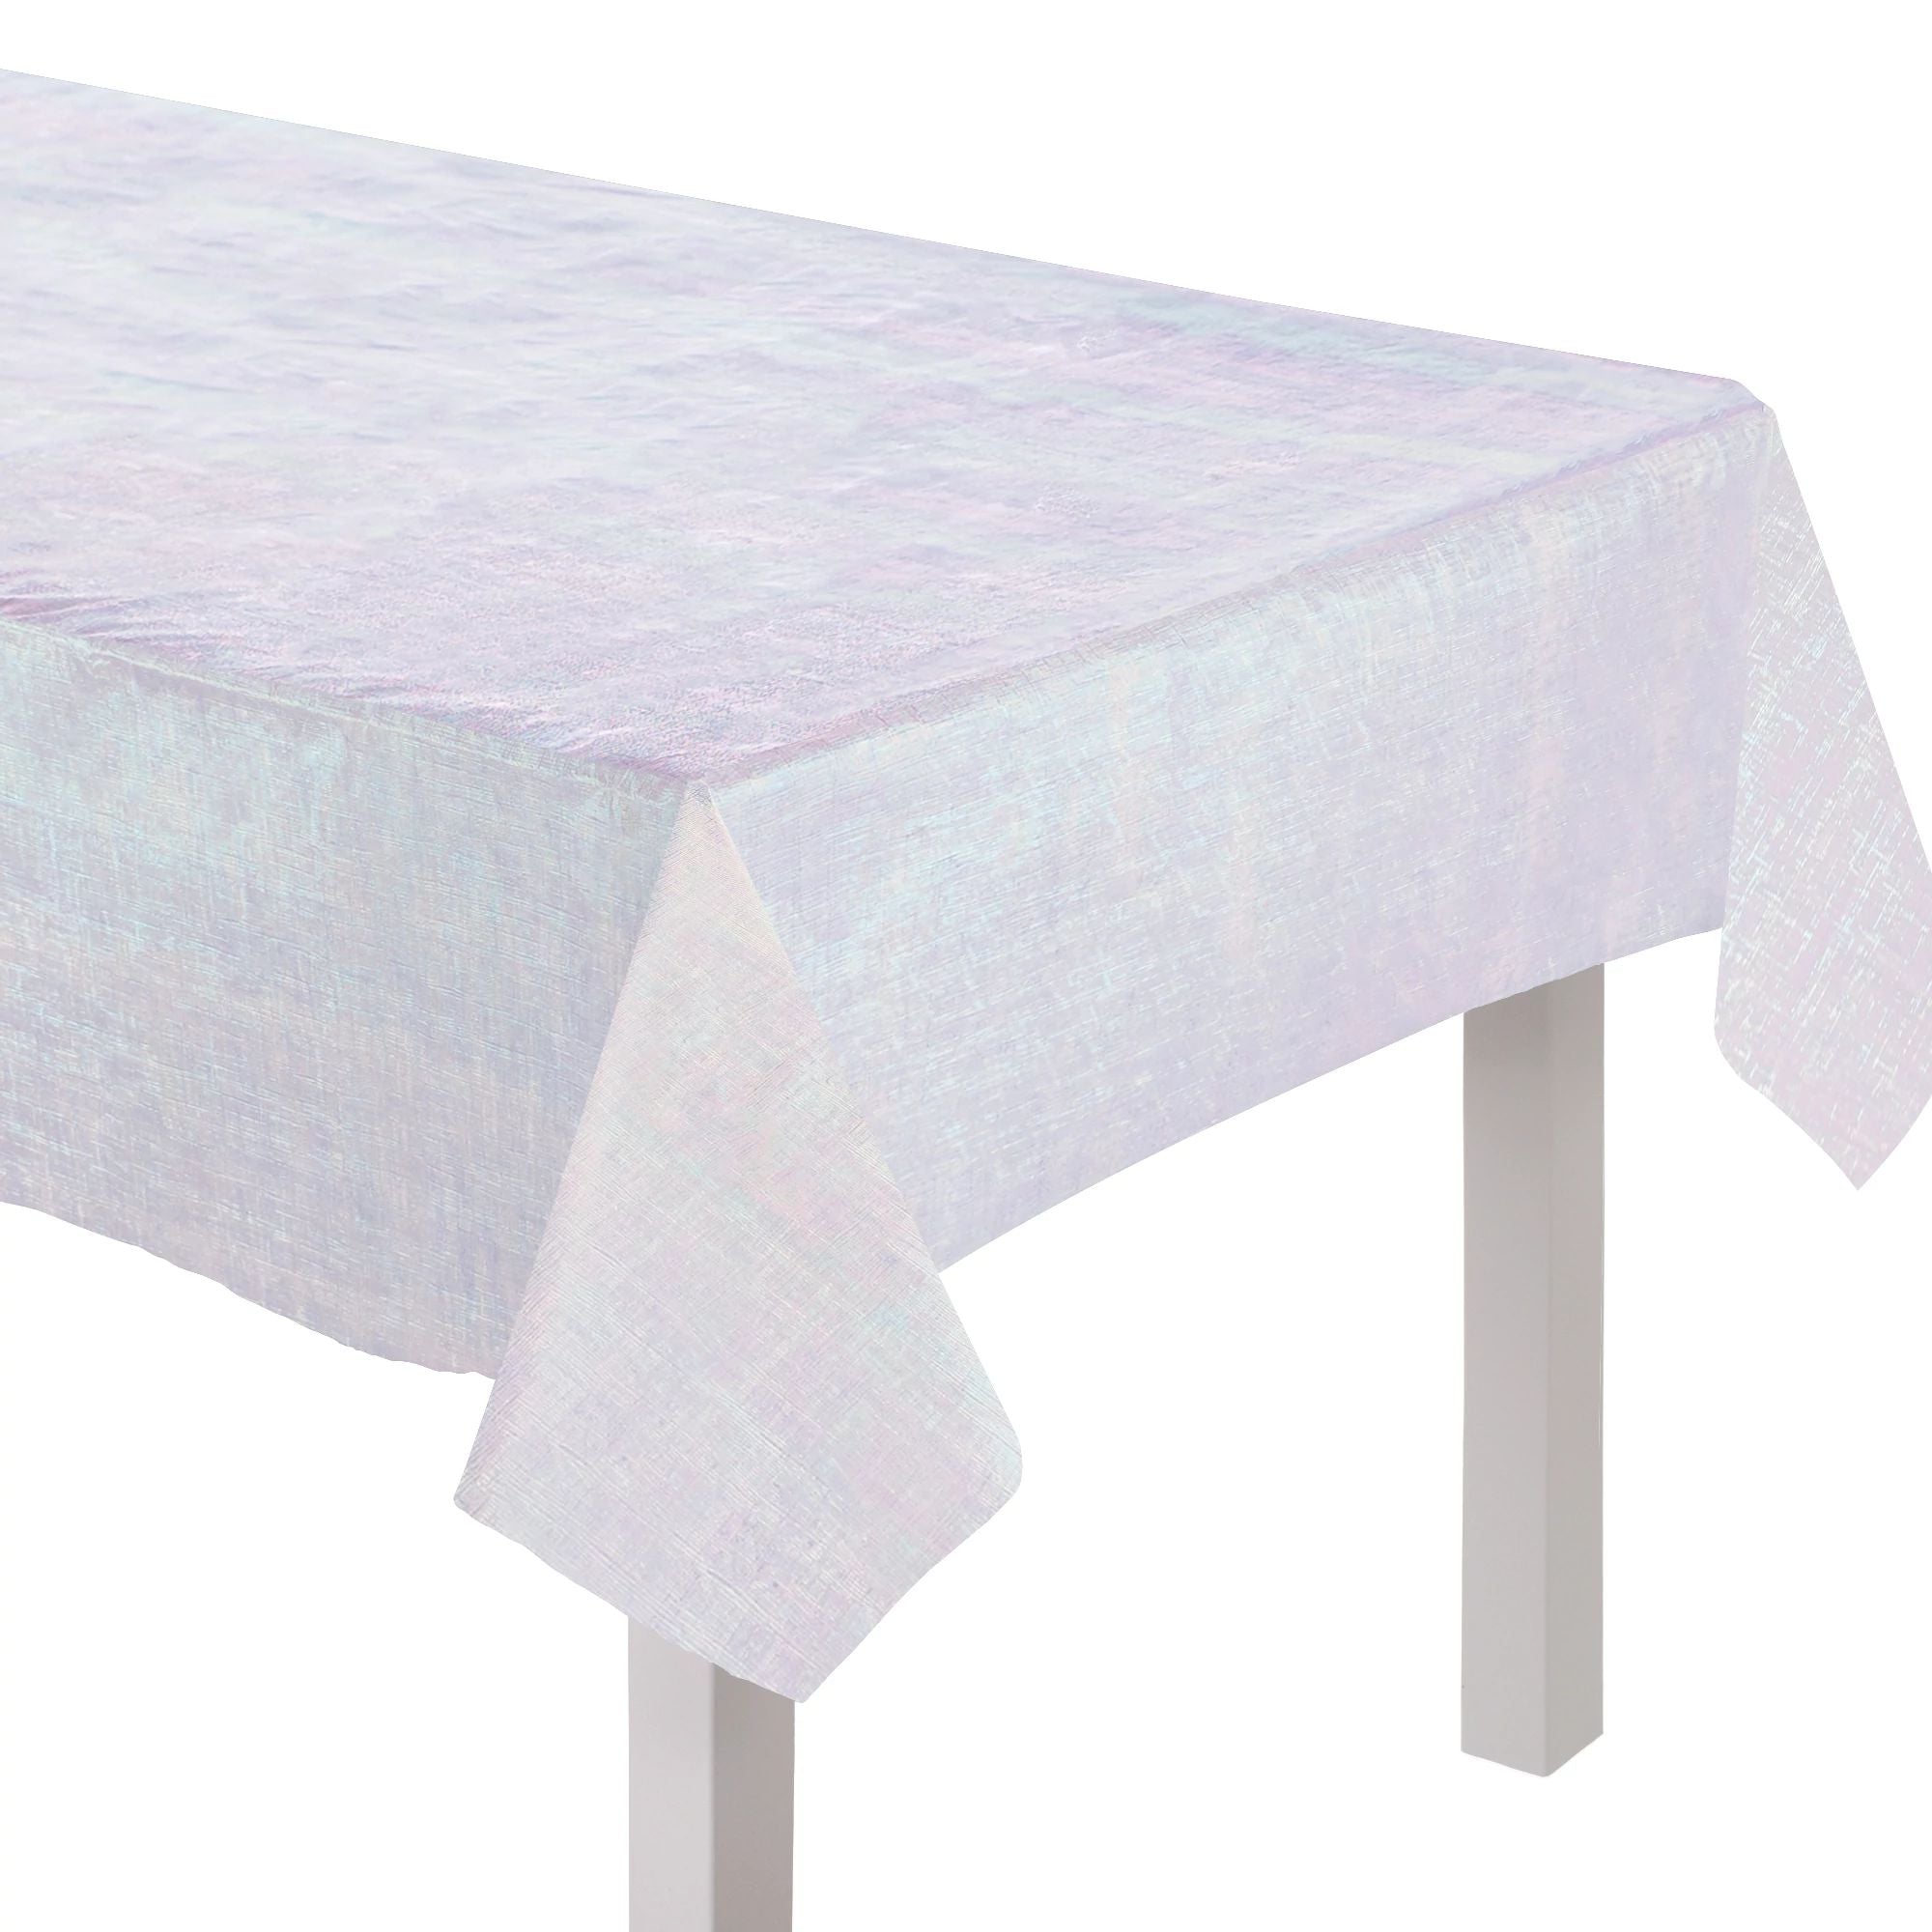 Luminous Birthday Plastic Tablecover, 54 X 102 Inches, 1 Count